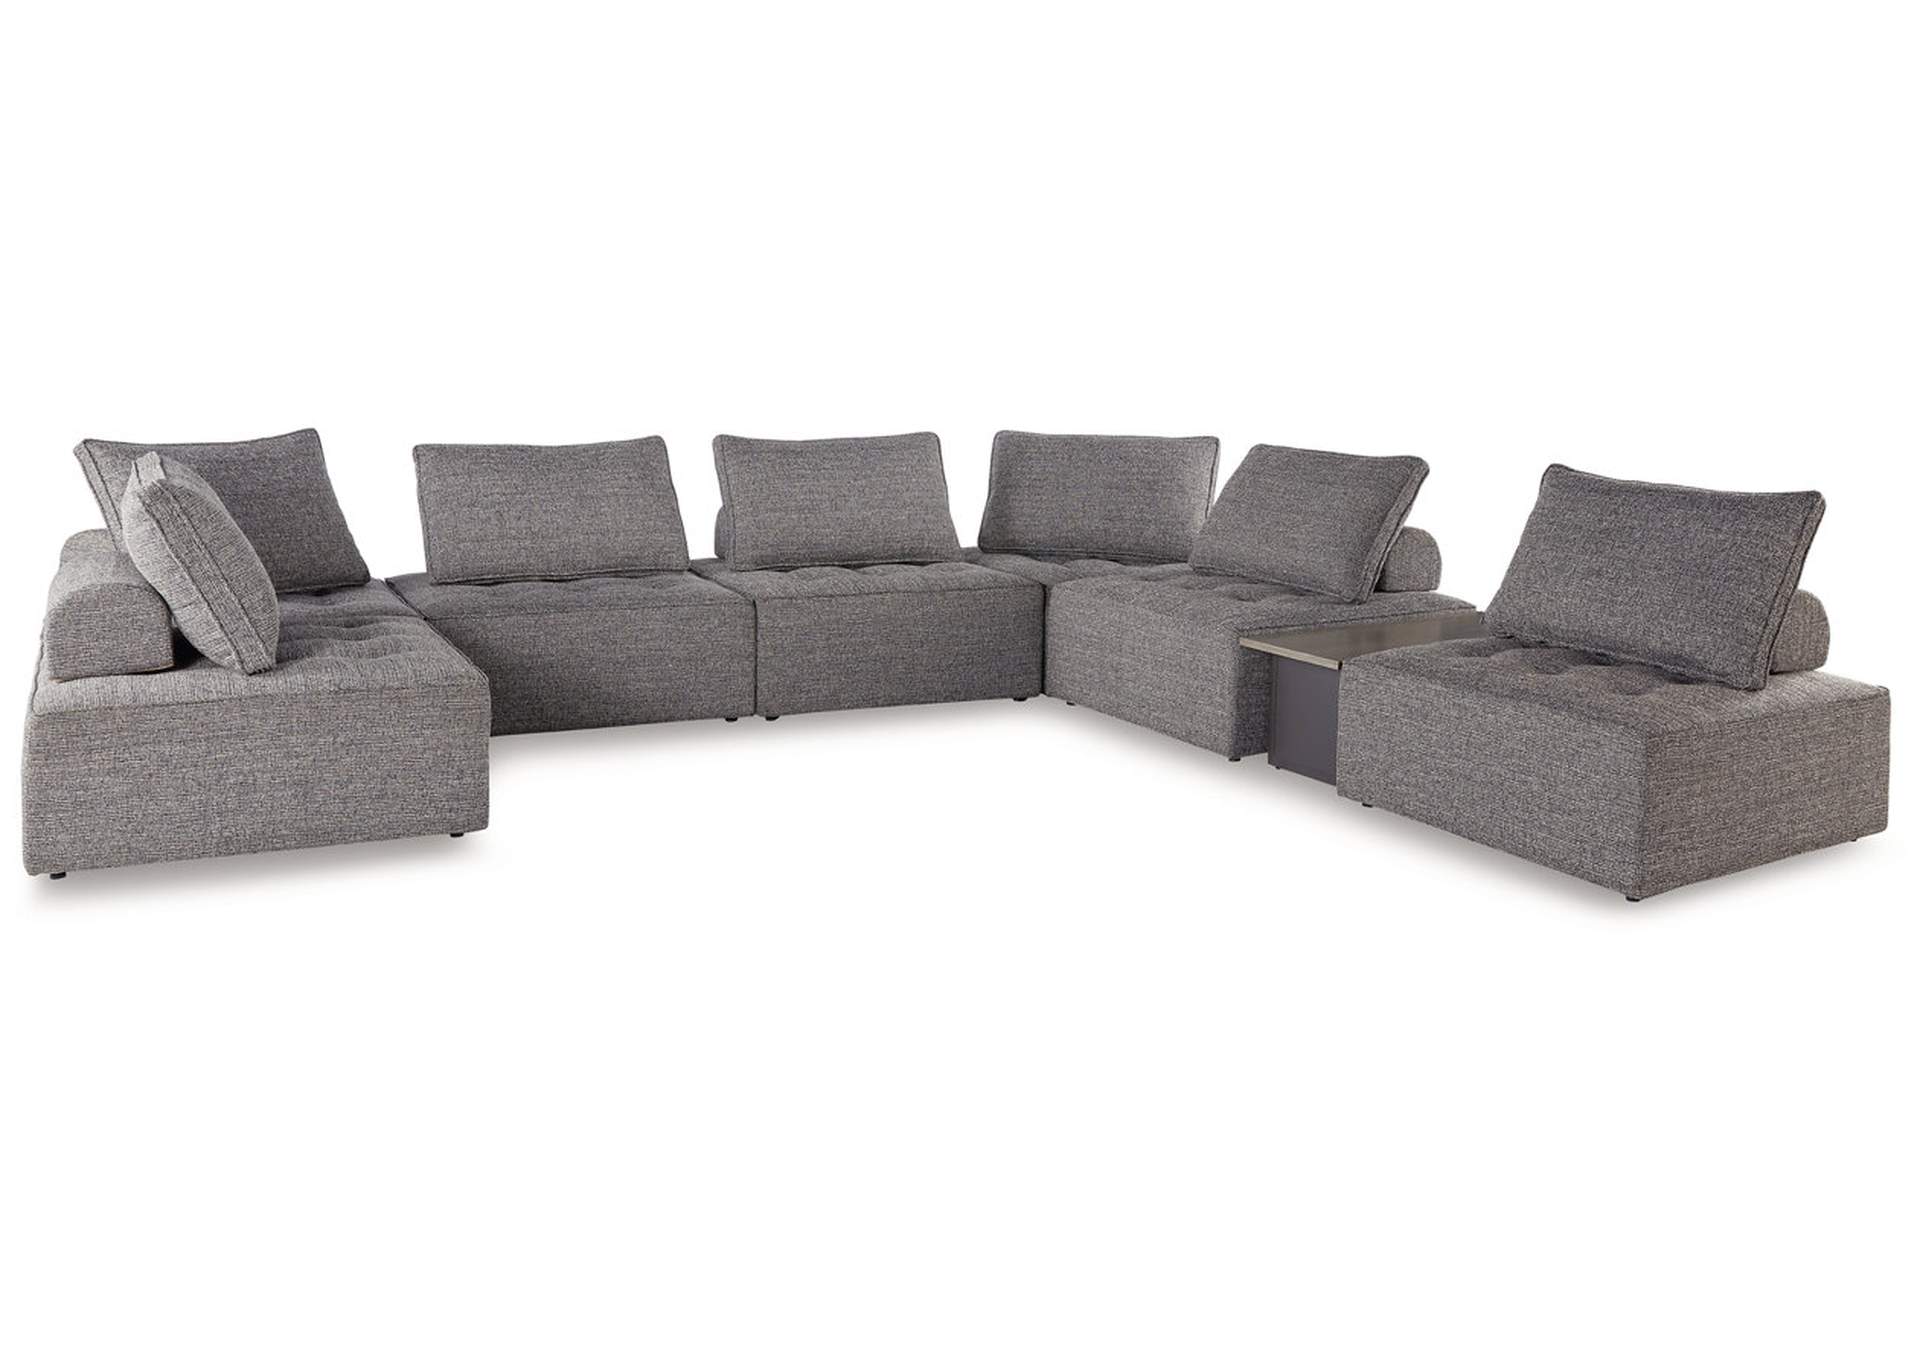 Bree Zee 8-Piece Outdoor Sectional,Outdoor By Ashley